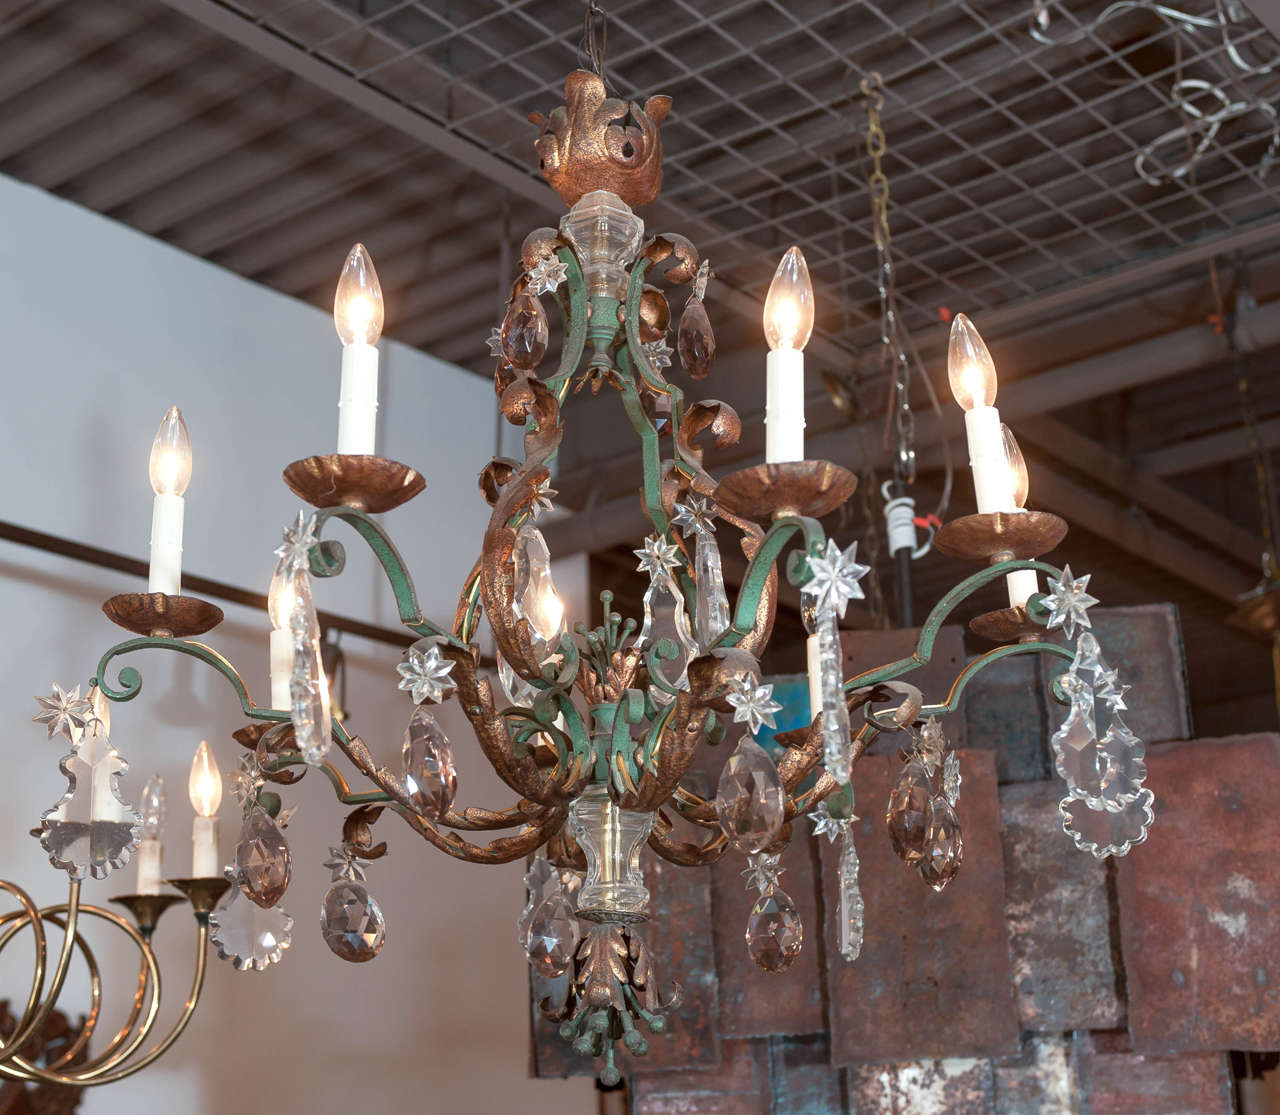 20th Century Antique Crystal and Metal Chandelier, c. 1920 France. Restored & Rewired